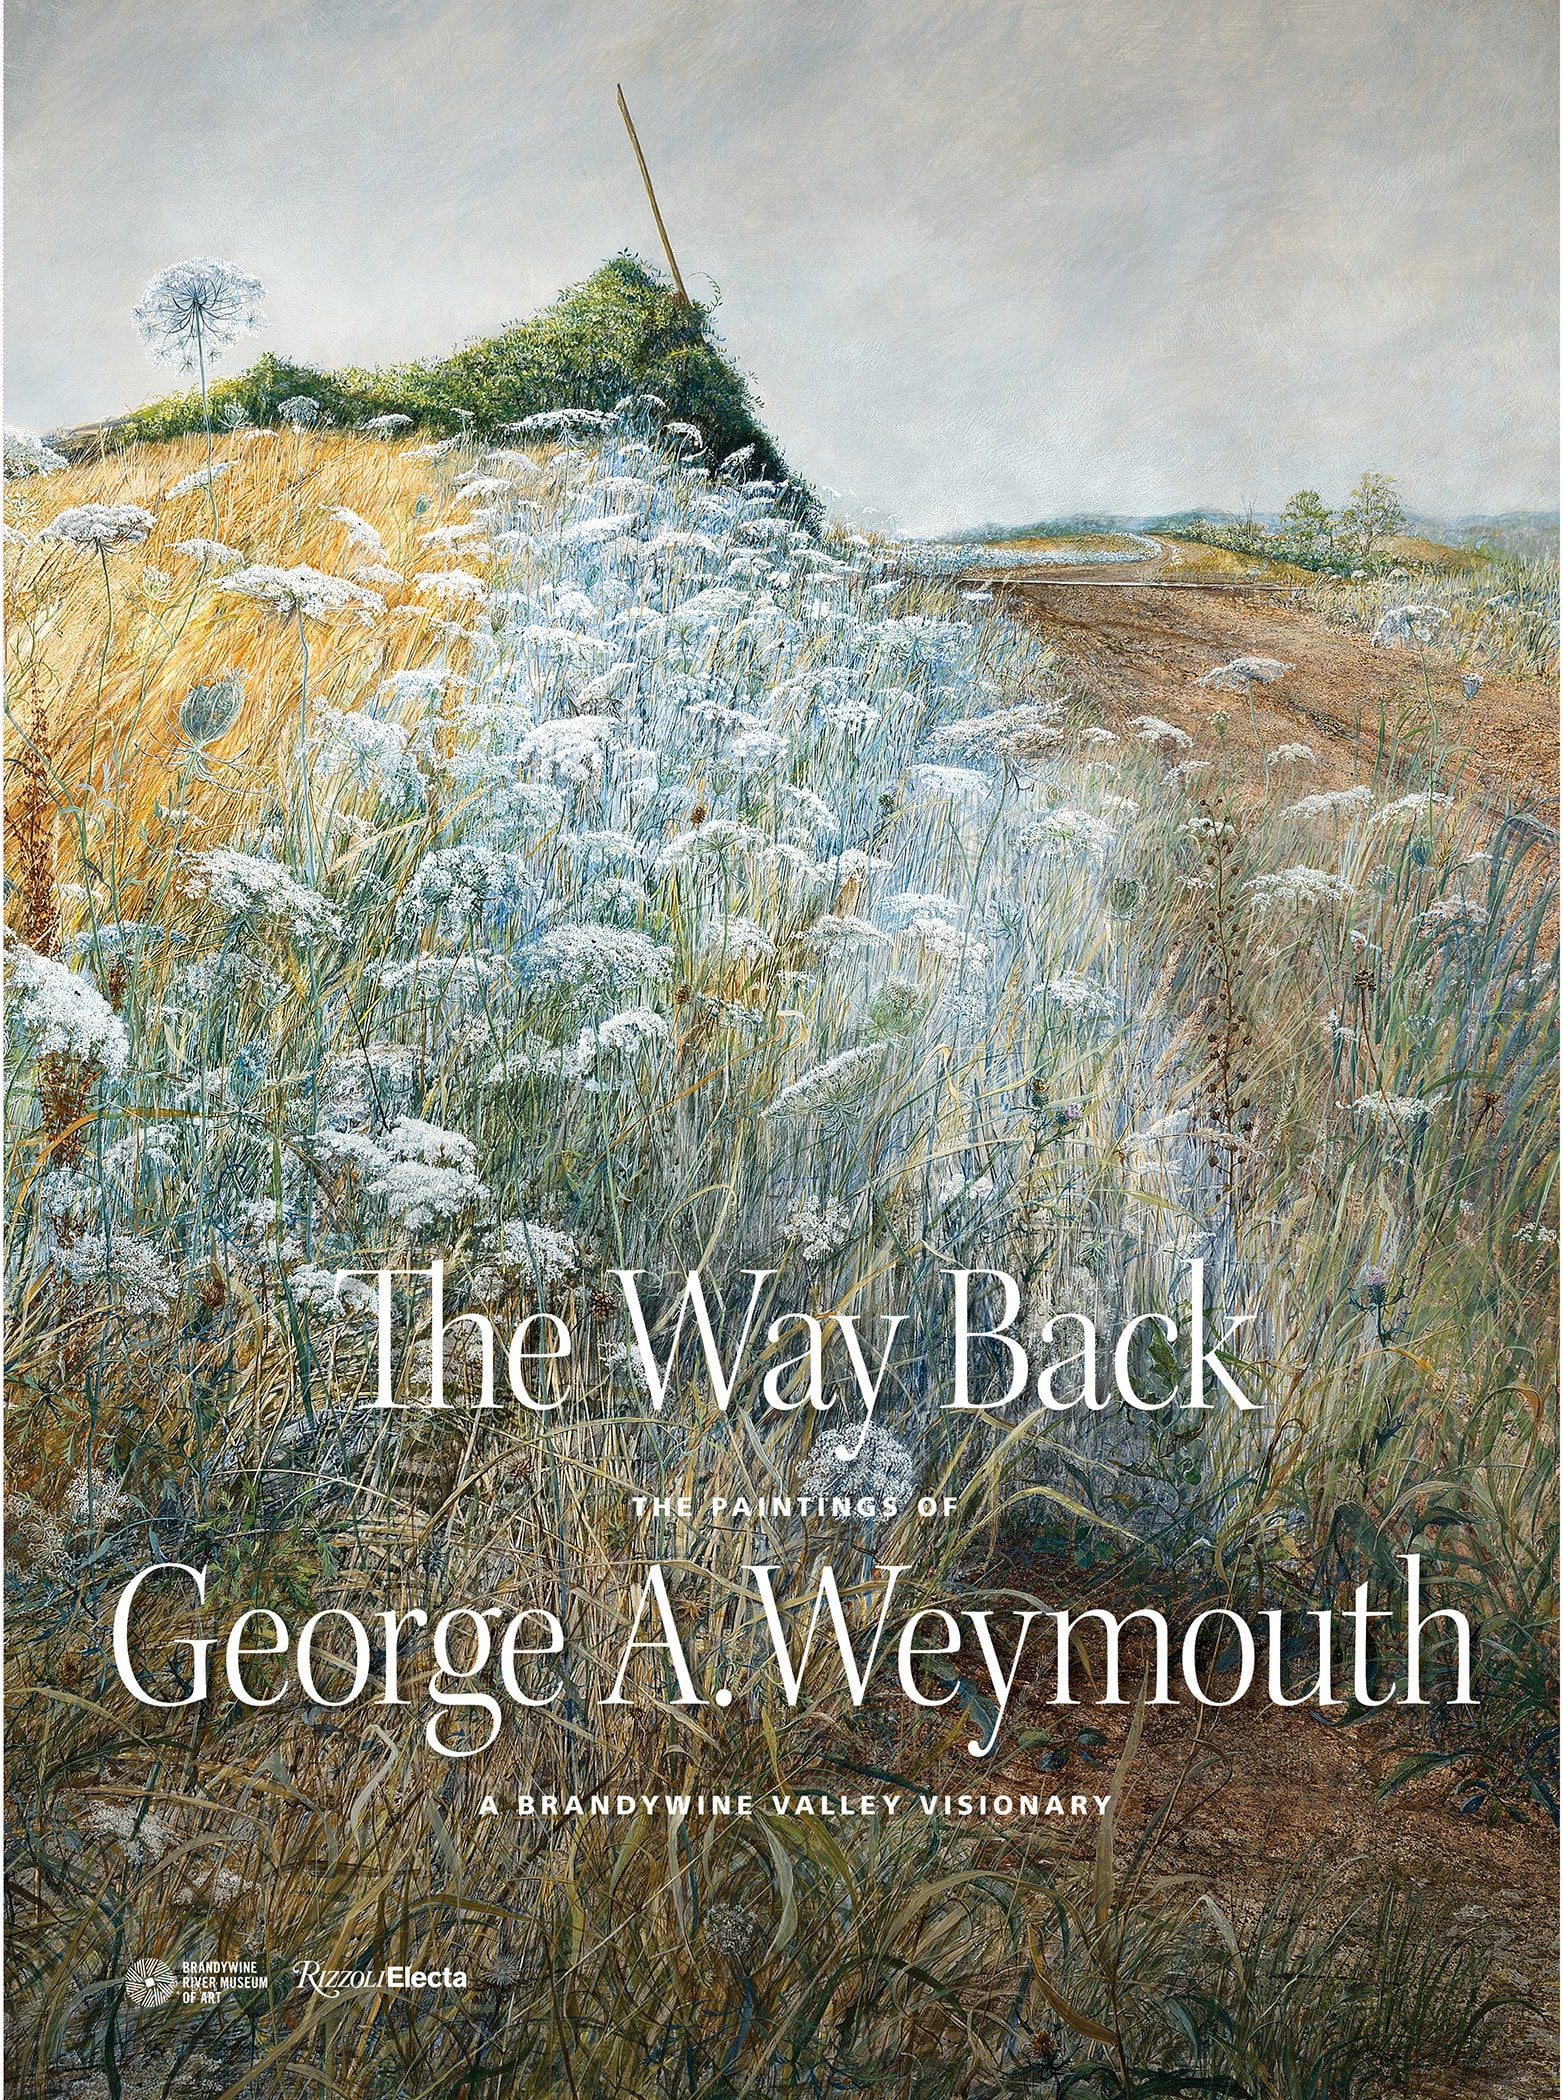 The Way Back The Paintings of George A Weymouth A Brandywine Valley
Visionary Epub-Ebook